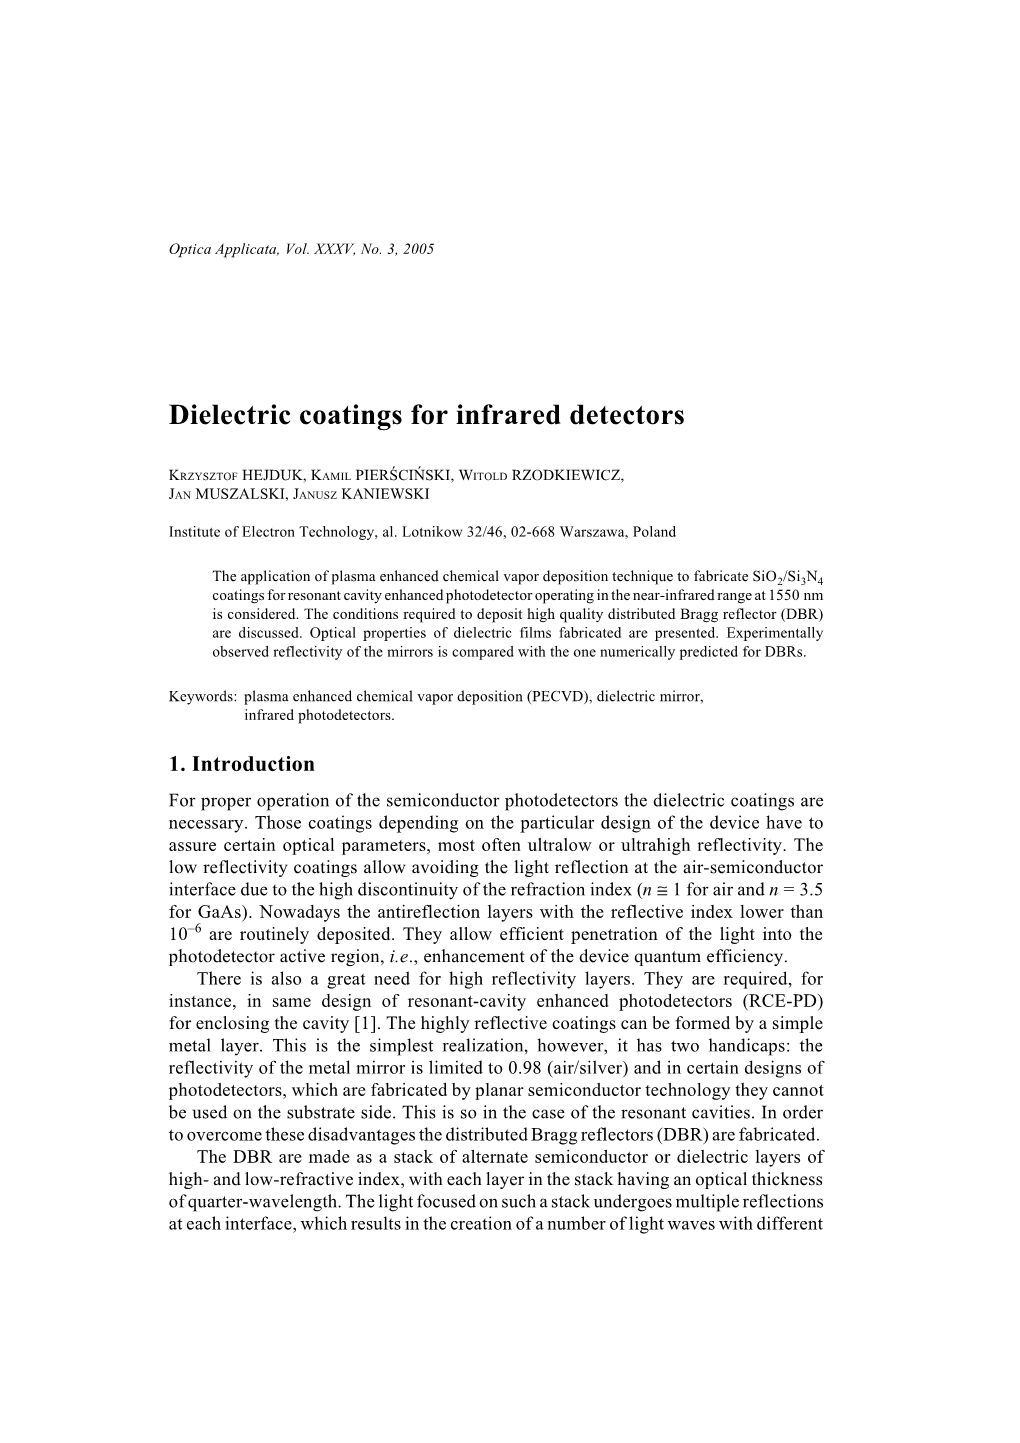 Dielectric Coatings for Infrared Detectors